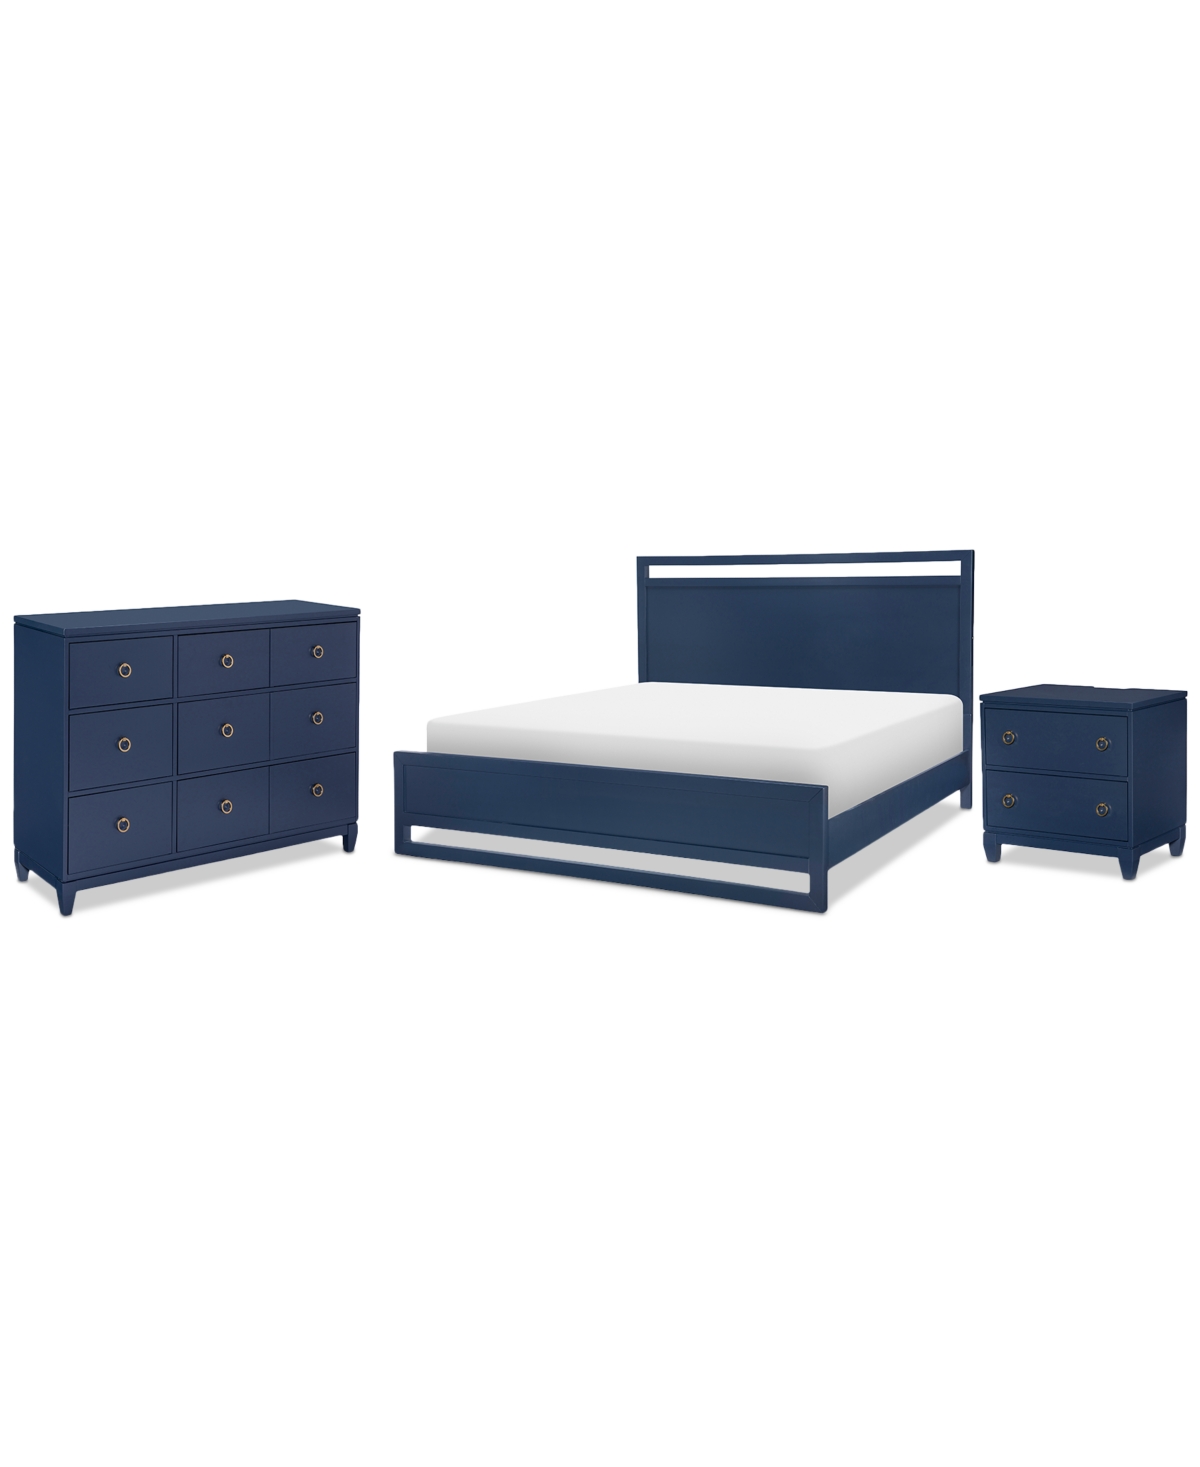 Furniture Summerland 3pc Set (king Panel Bed, Chest, Nightstand) In Blue